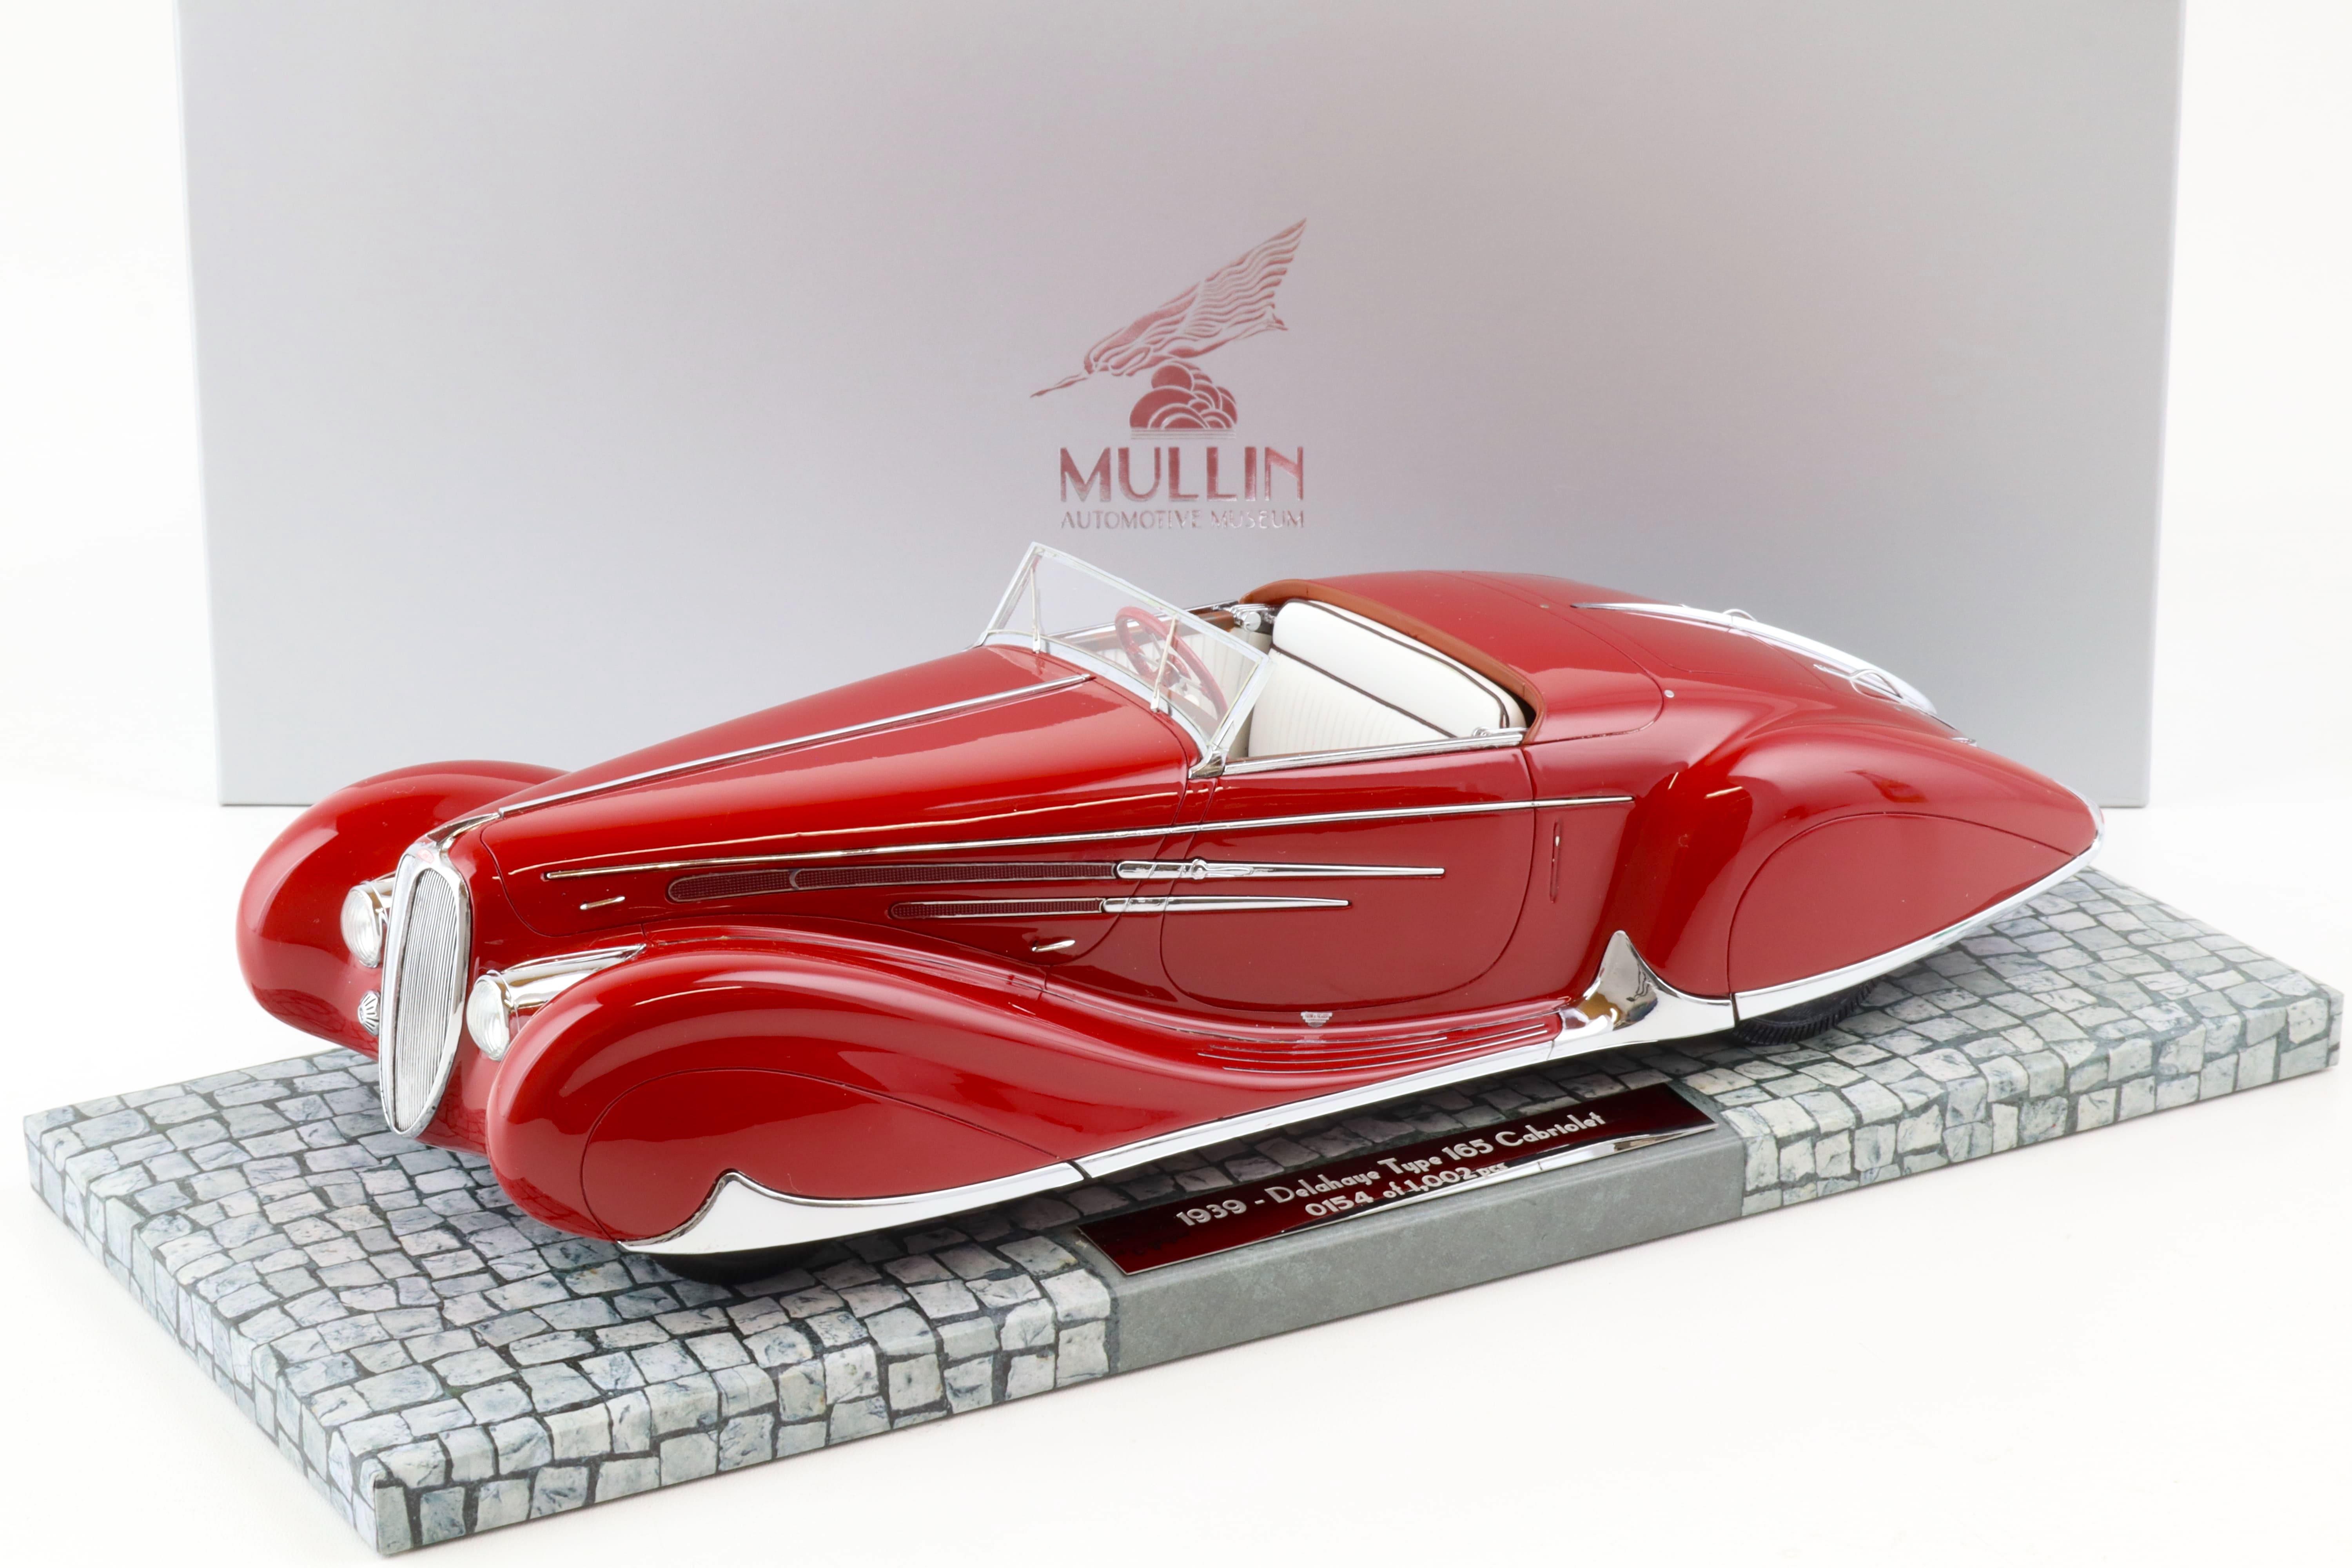 1:18 Minichamps 1939 Delahaye Type 165 Cabriolet red The Mullin Automotive Museum